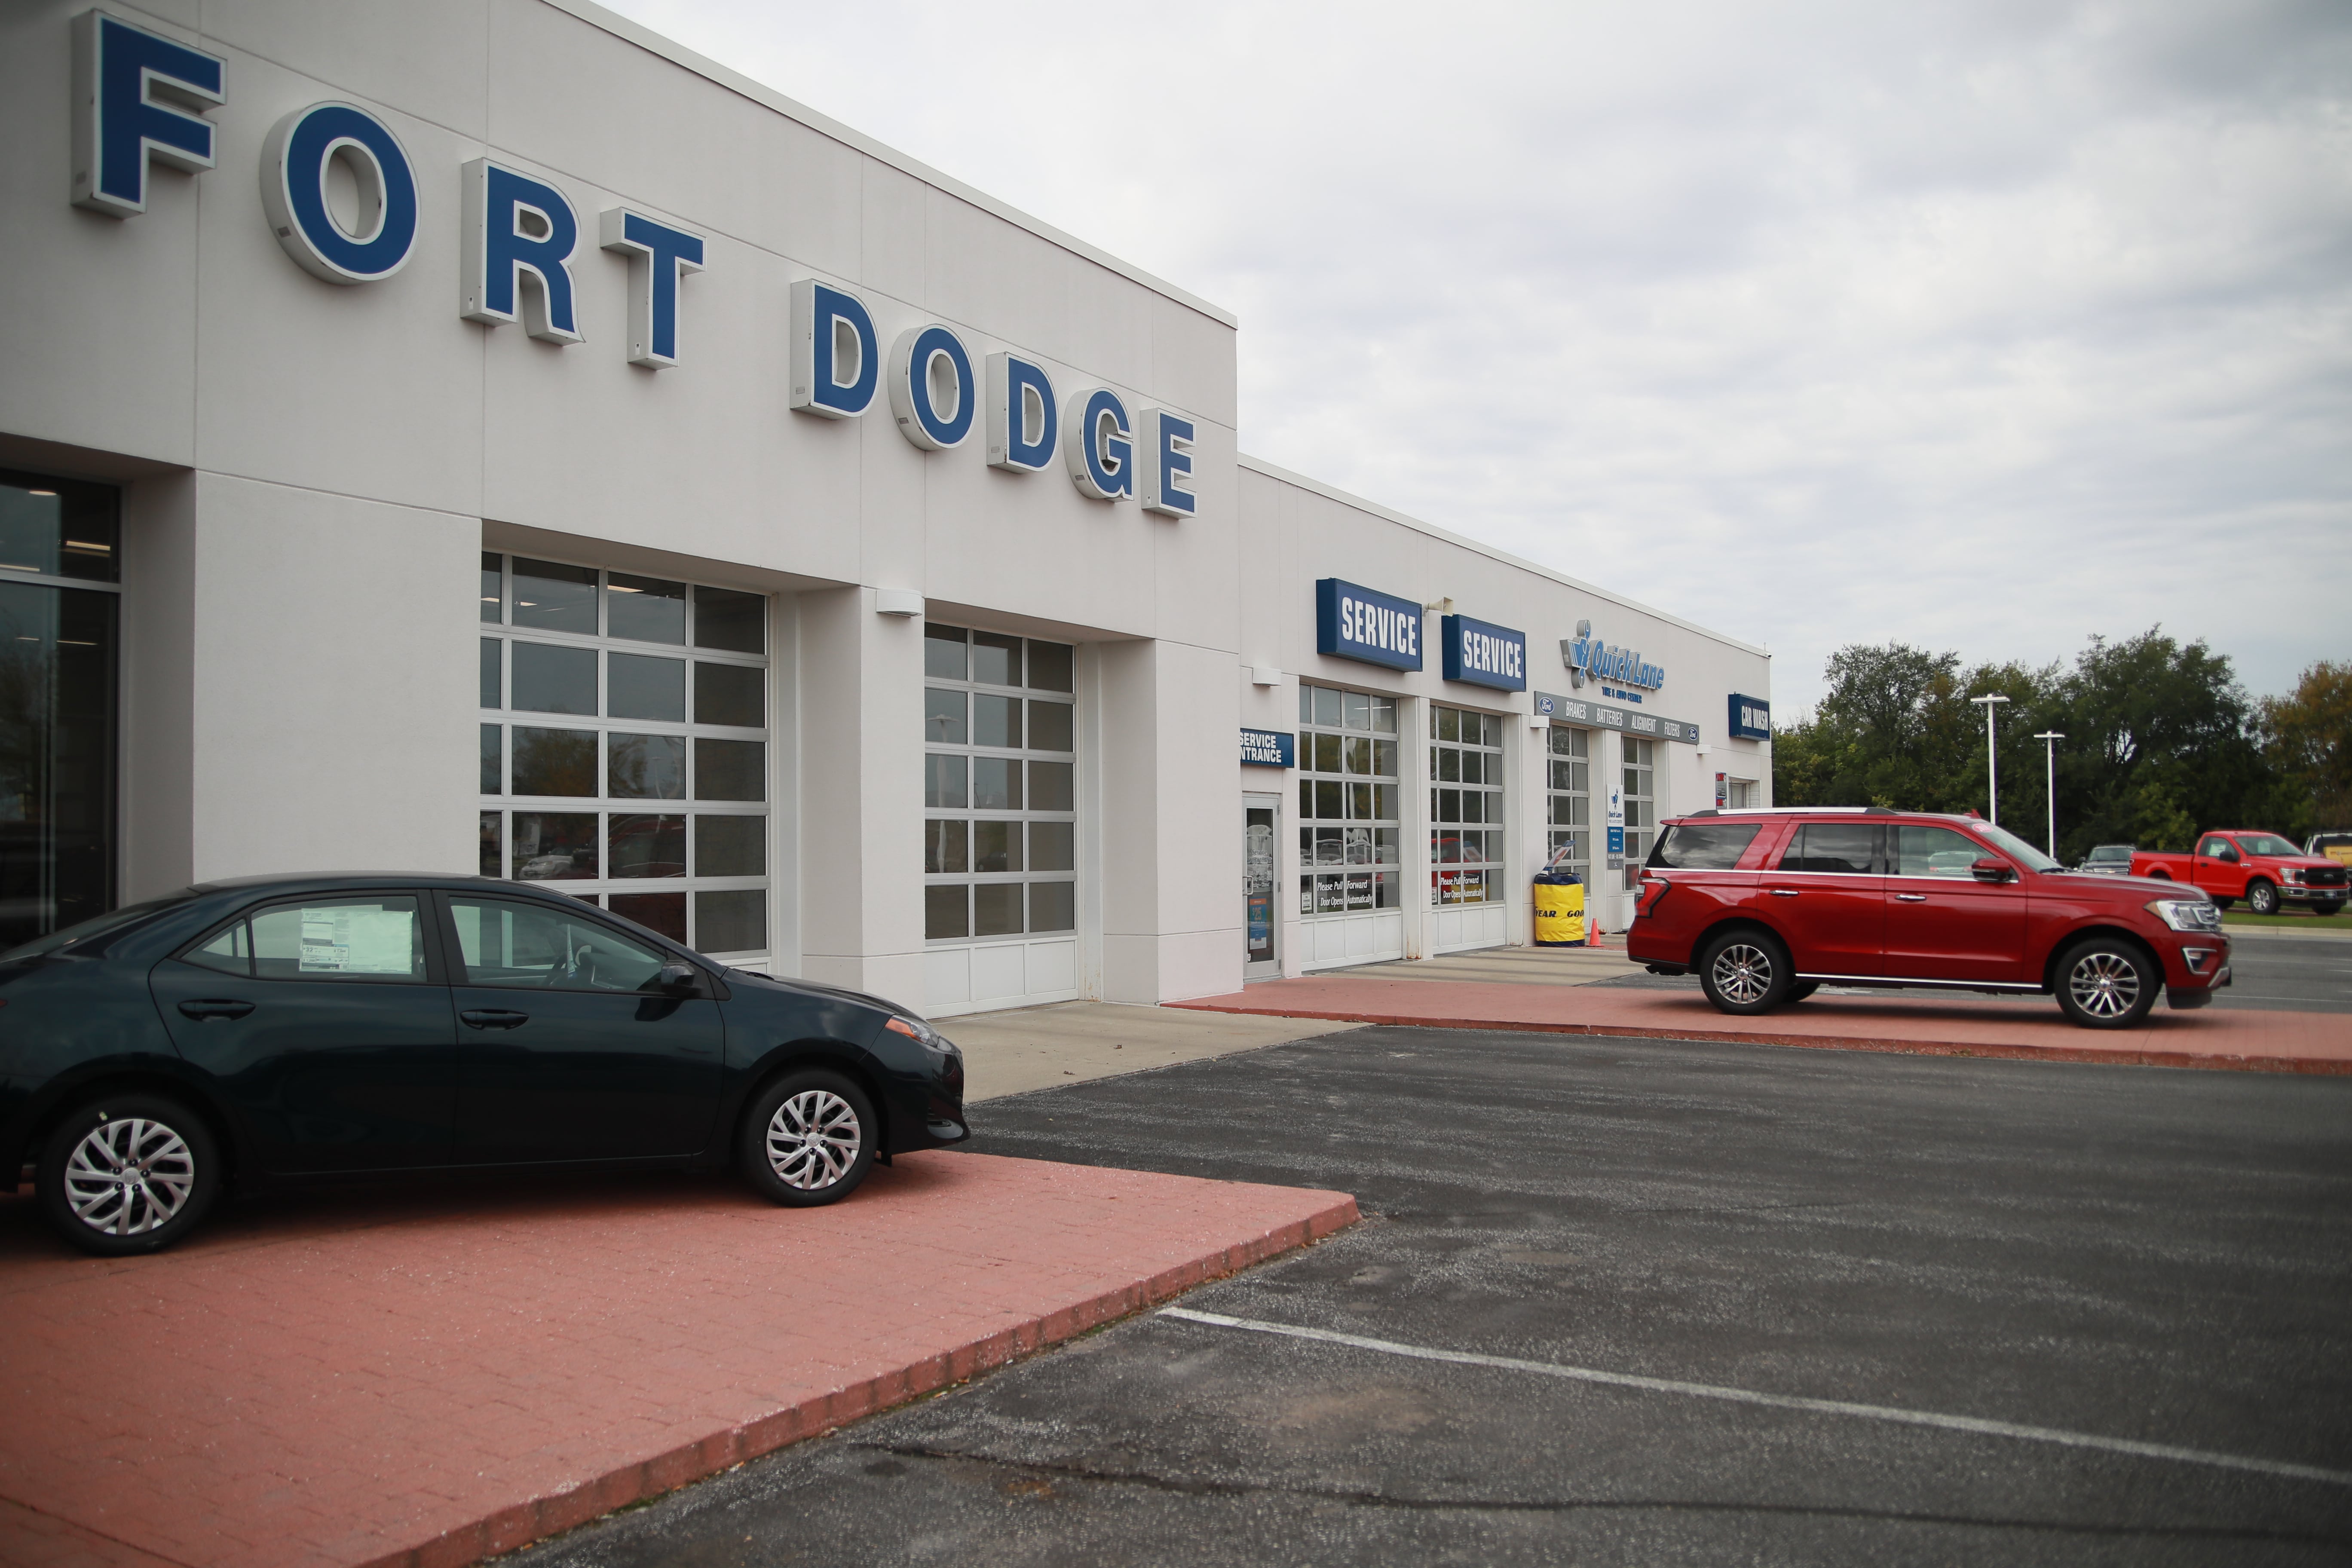 Our Fort Dodge, IA service center